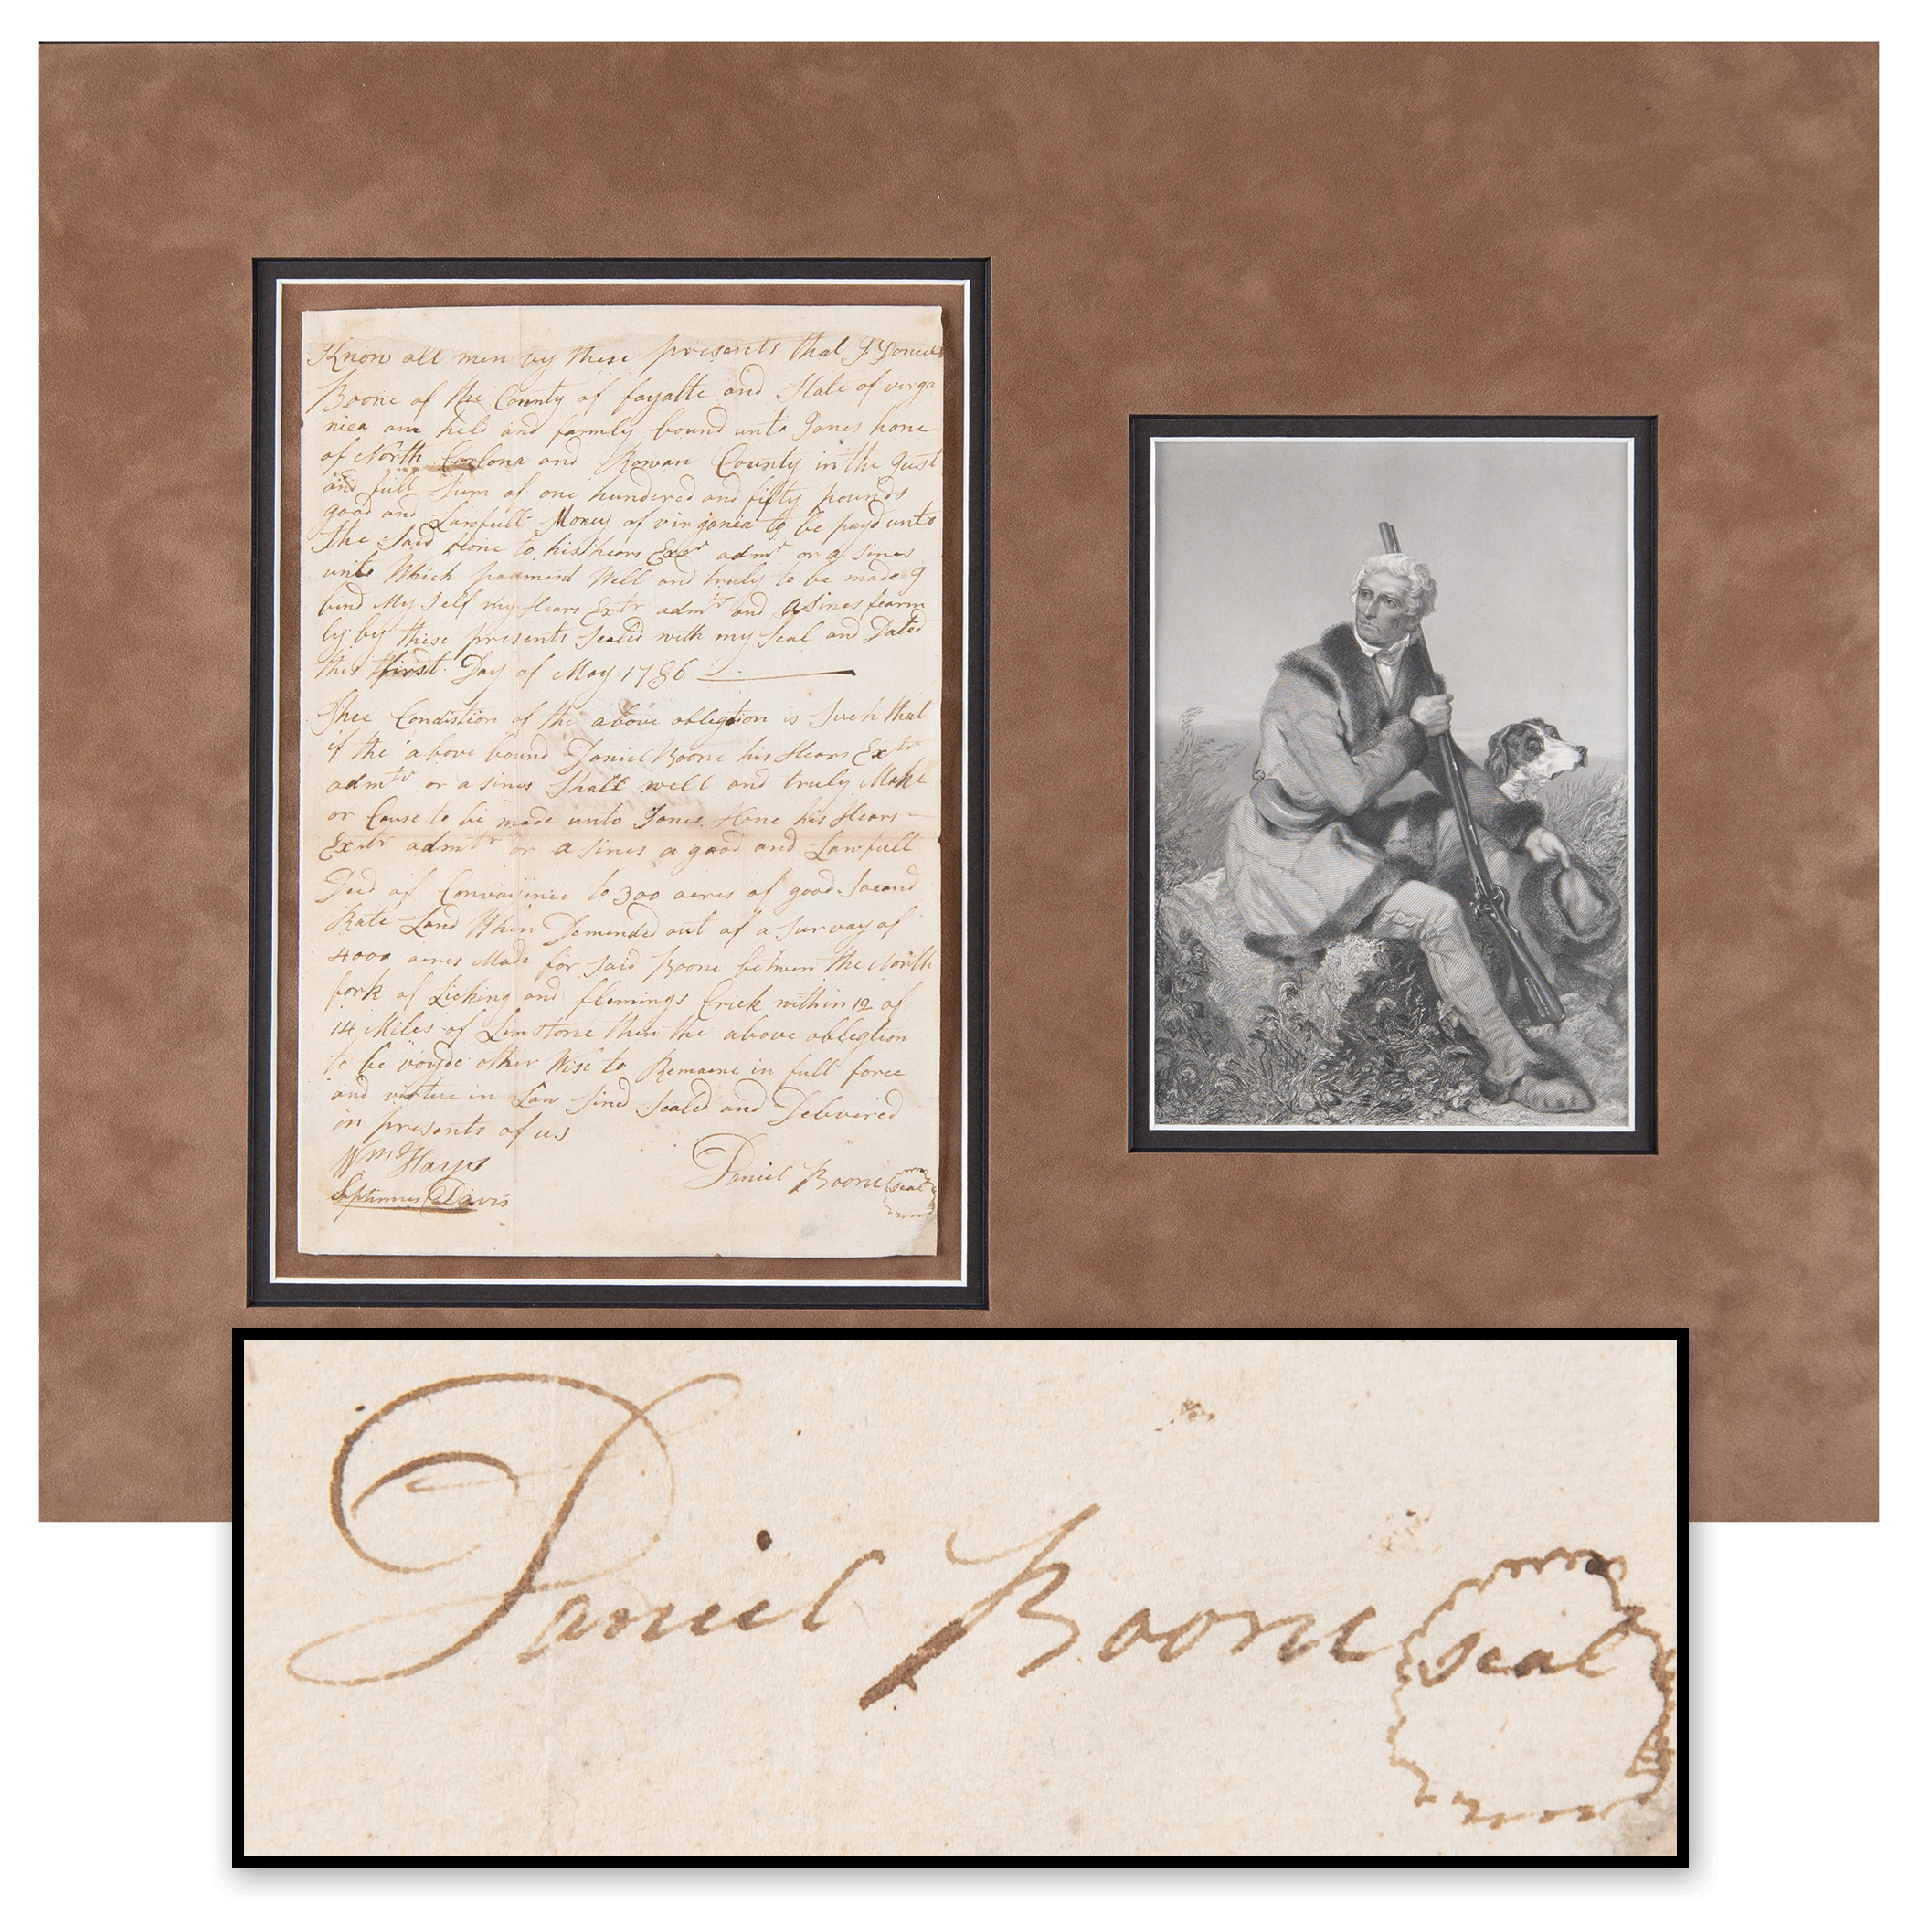 Lot #109 Daniel Boone Autograph Document Signed for Land Bond — "Boone" Written Four Times! - Image 1